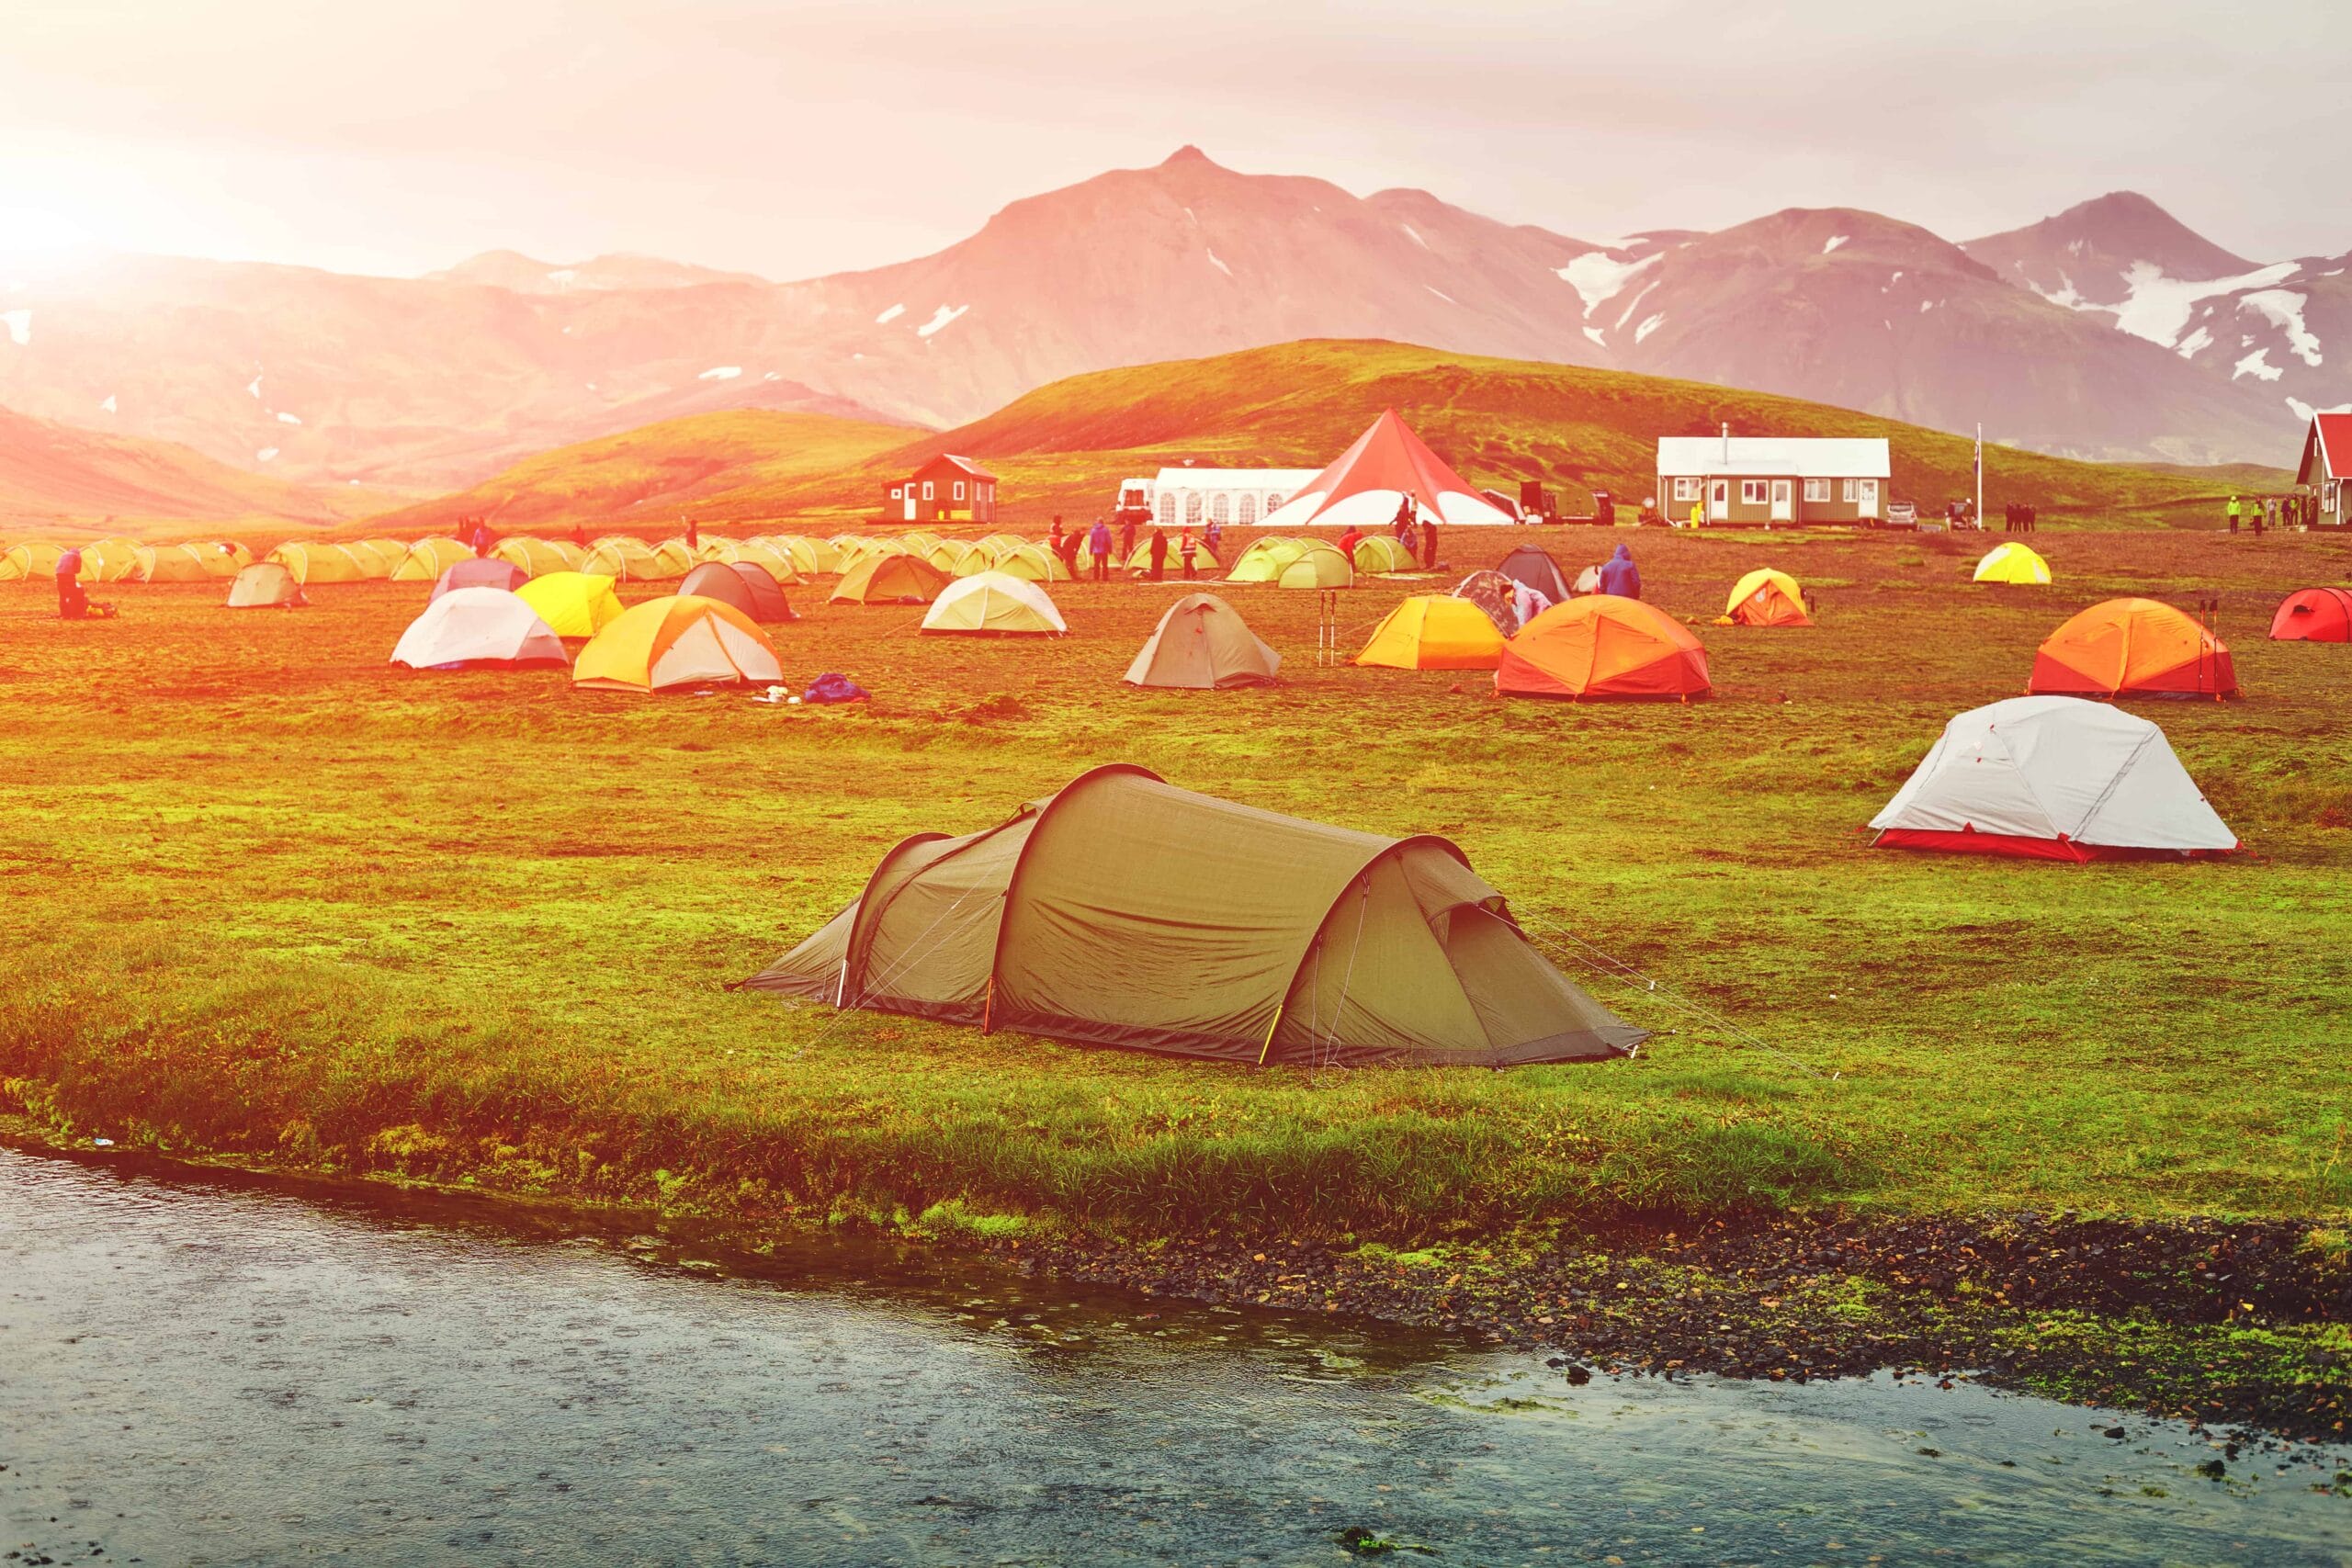 Camping Packing List For Iceland Things You Need While Camping In